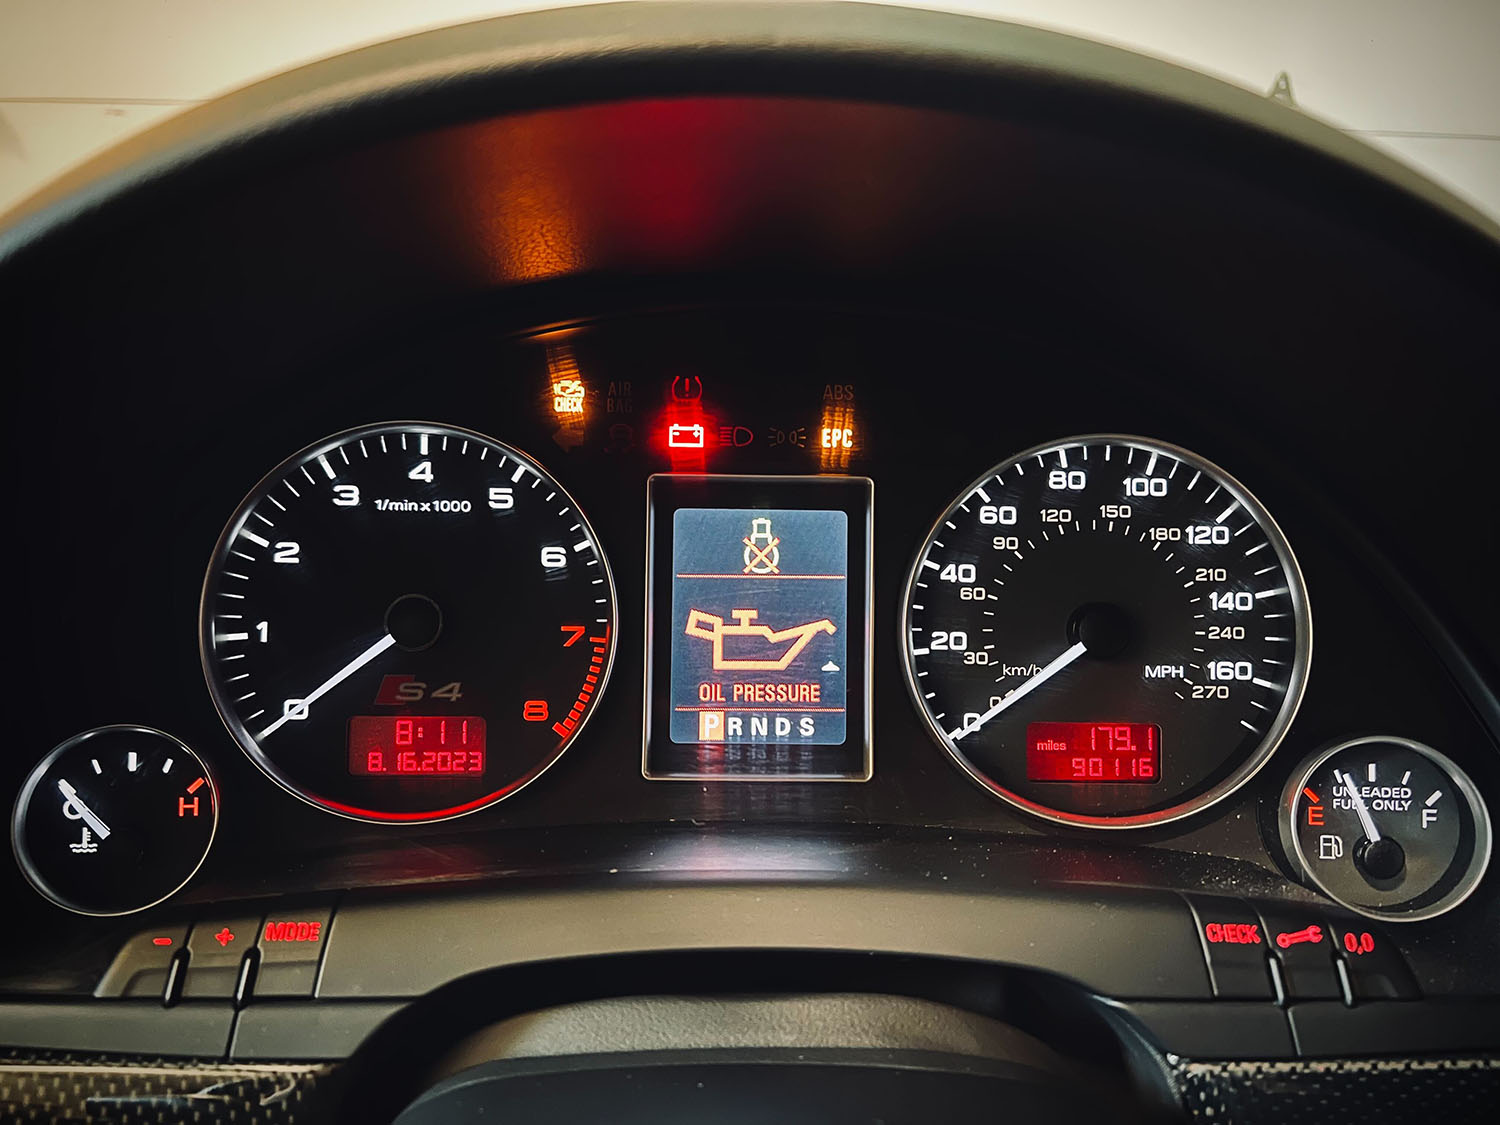 Service interval light on dashboard